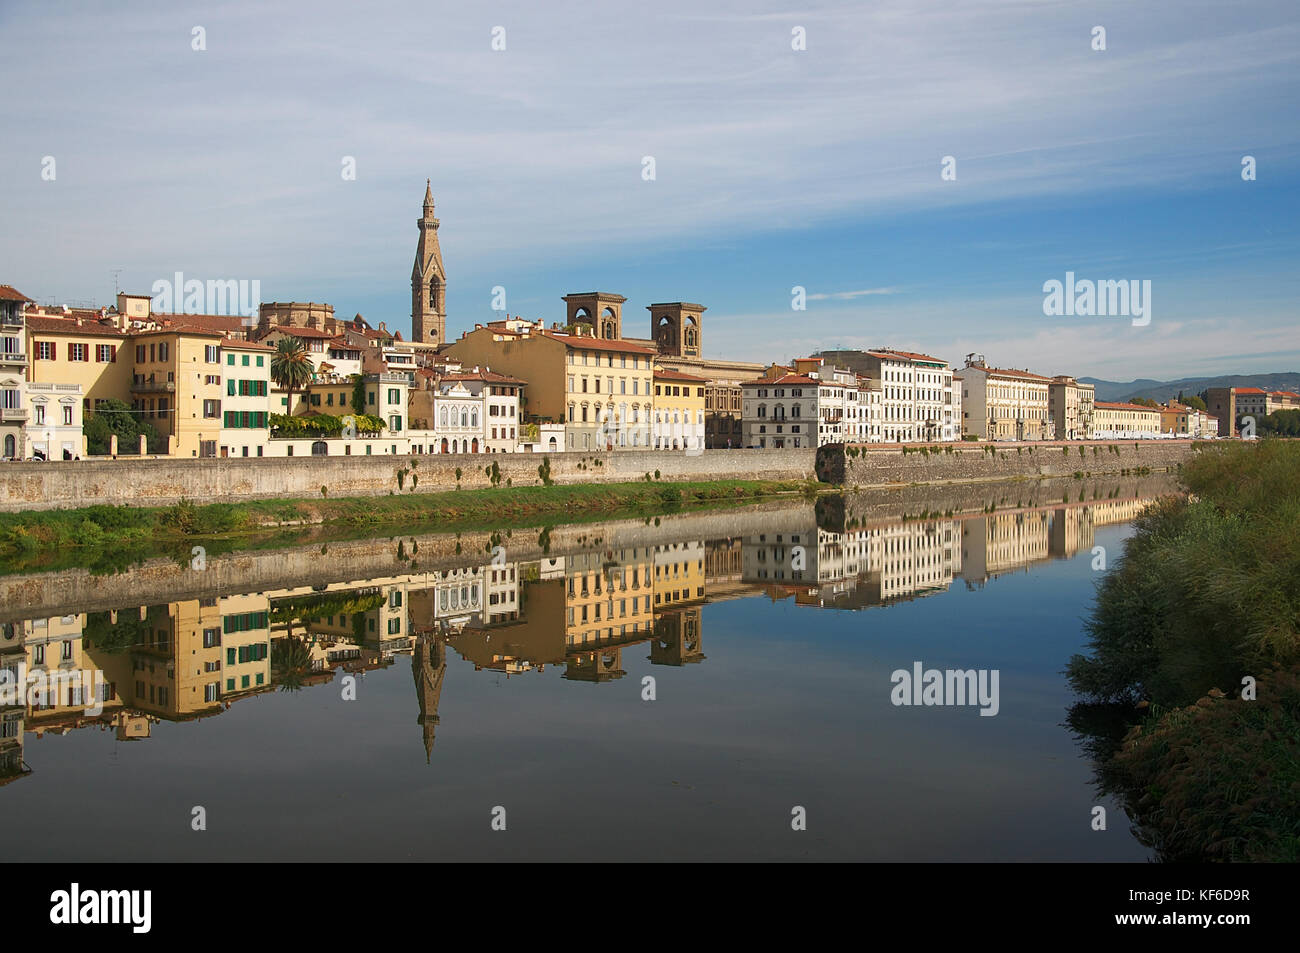 Part of the riverside of Florence reflected in the calm water of the Arno River Stock Photo